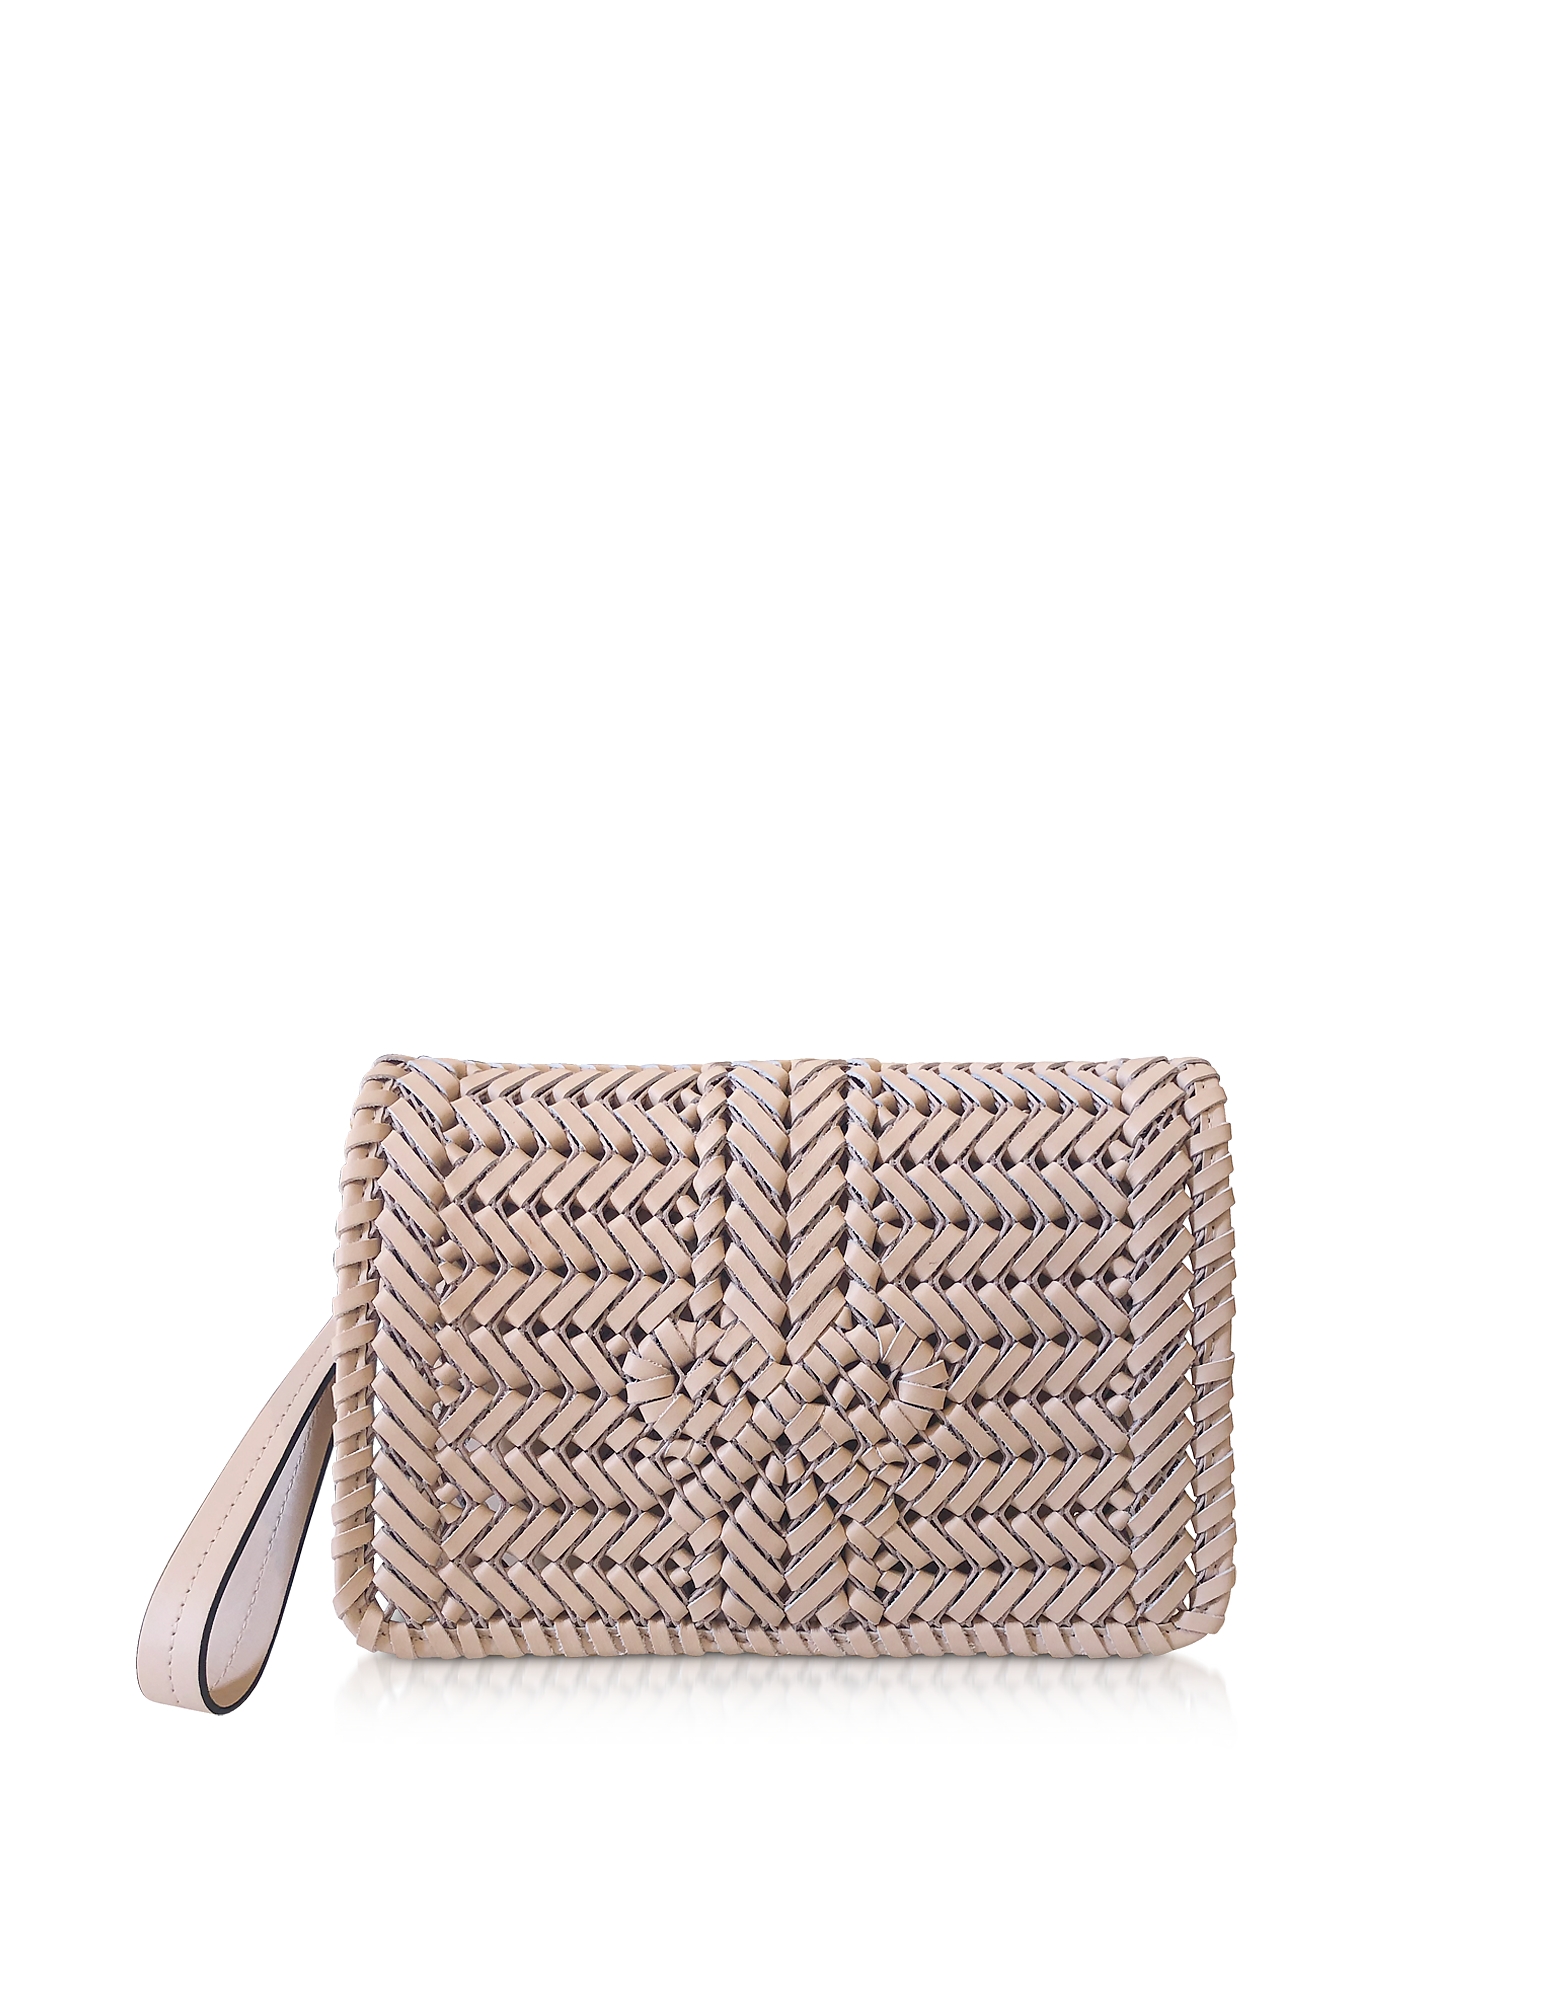 Anya Hindmarch Woven Calf Leather The Neeson Crossbody Bag In Pink